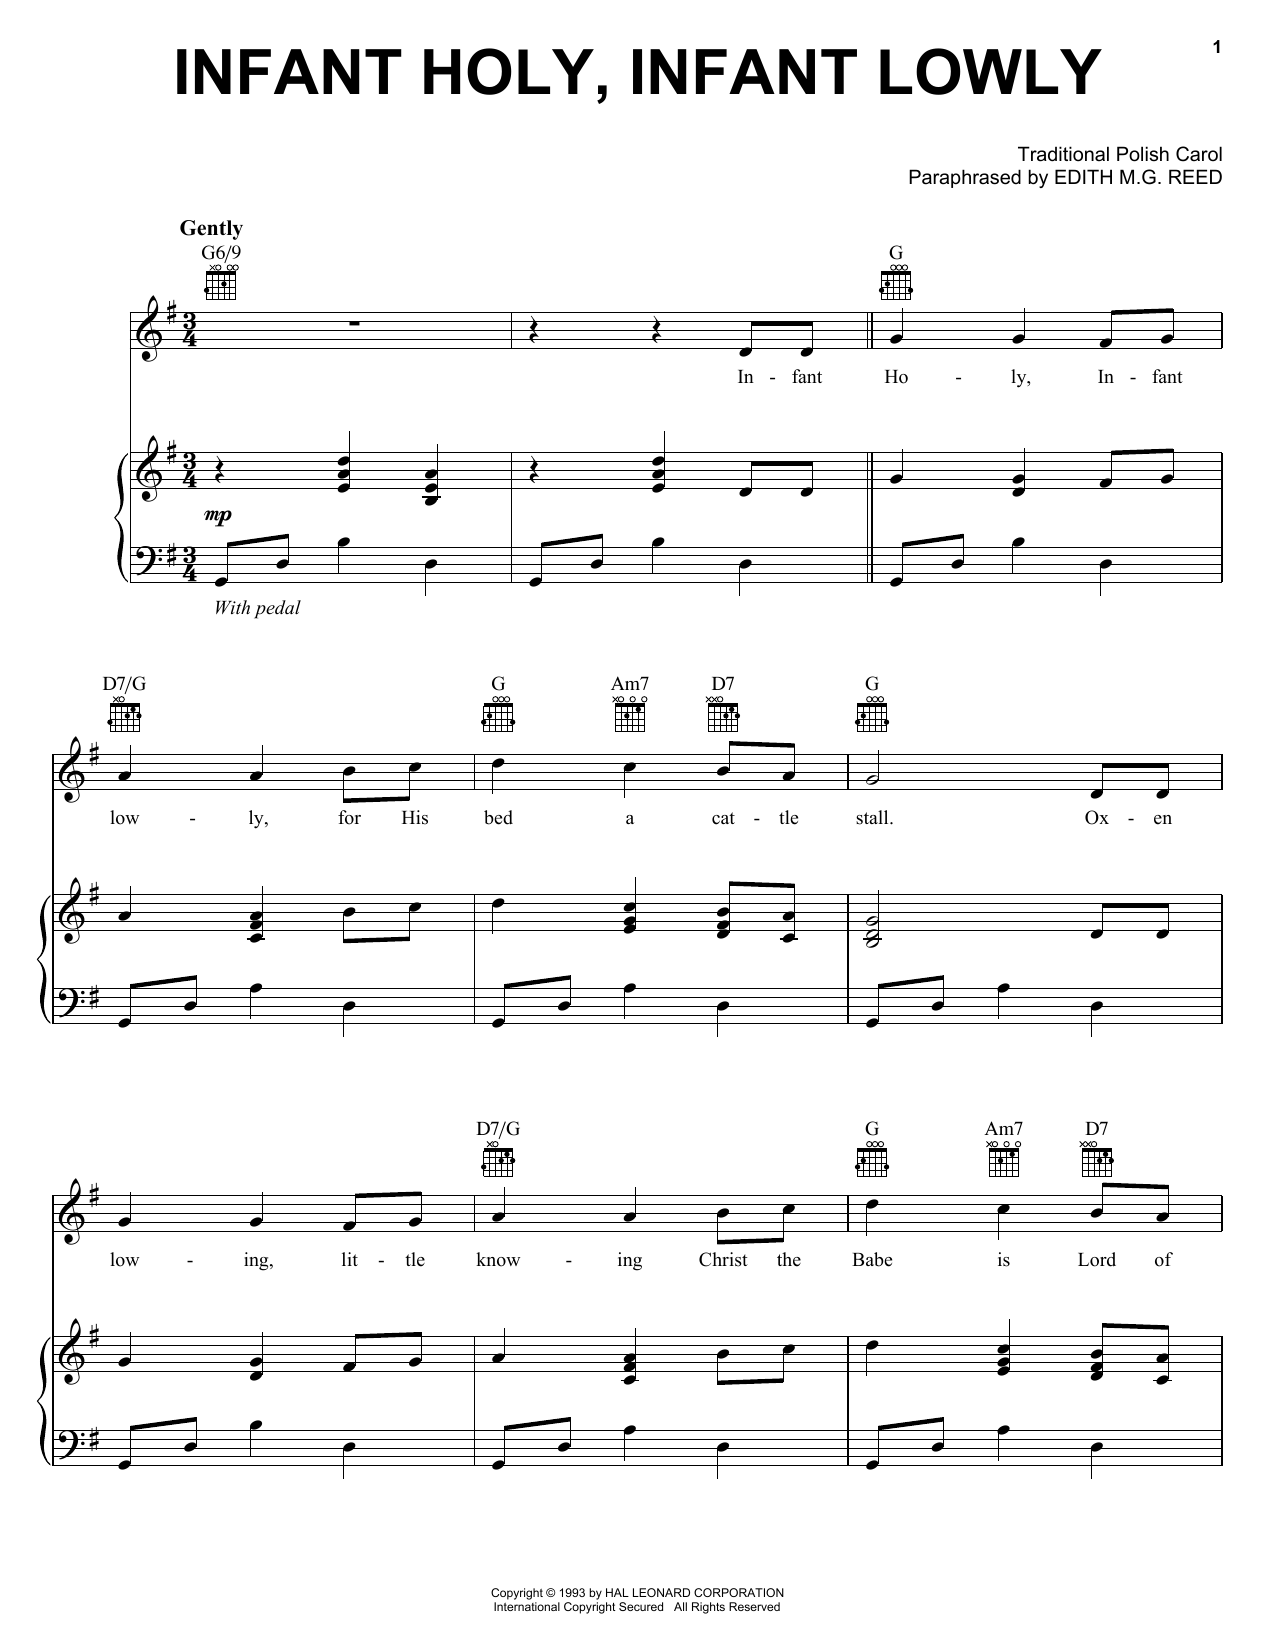 Traditional Polish Carol Infant Holy, Infant Lowly sheet music notes and chords. Download Printable PDF.